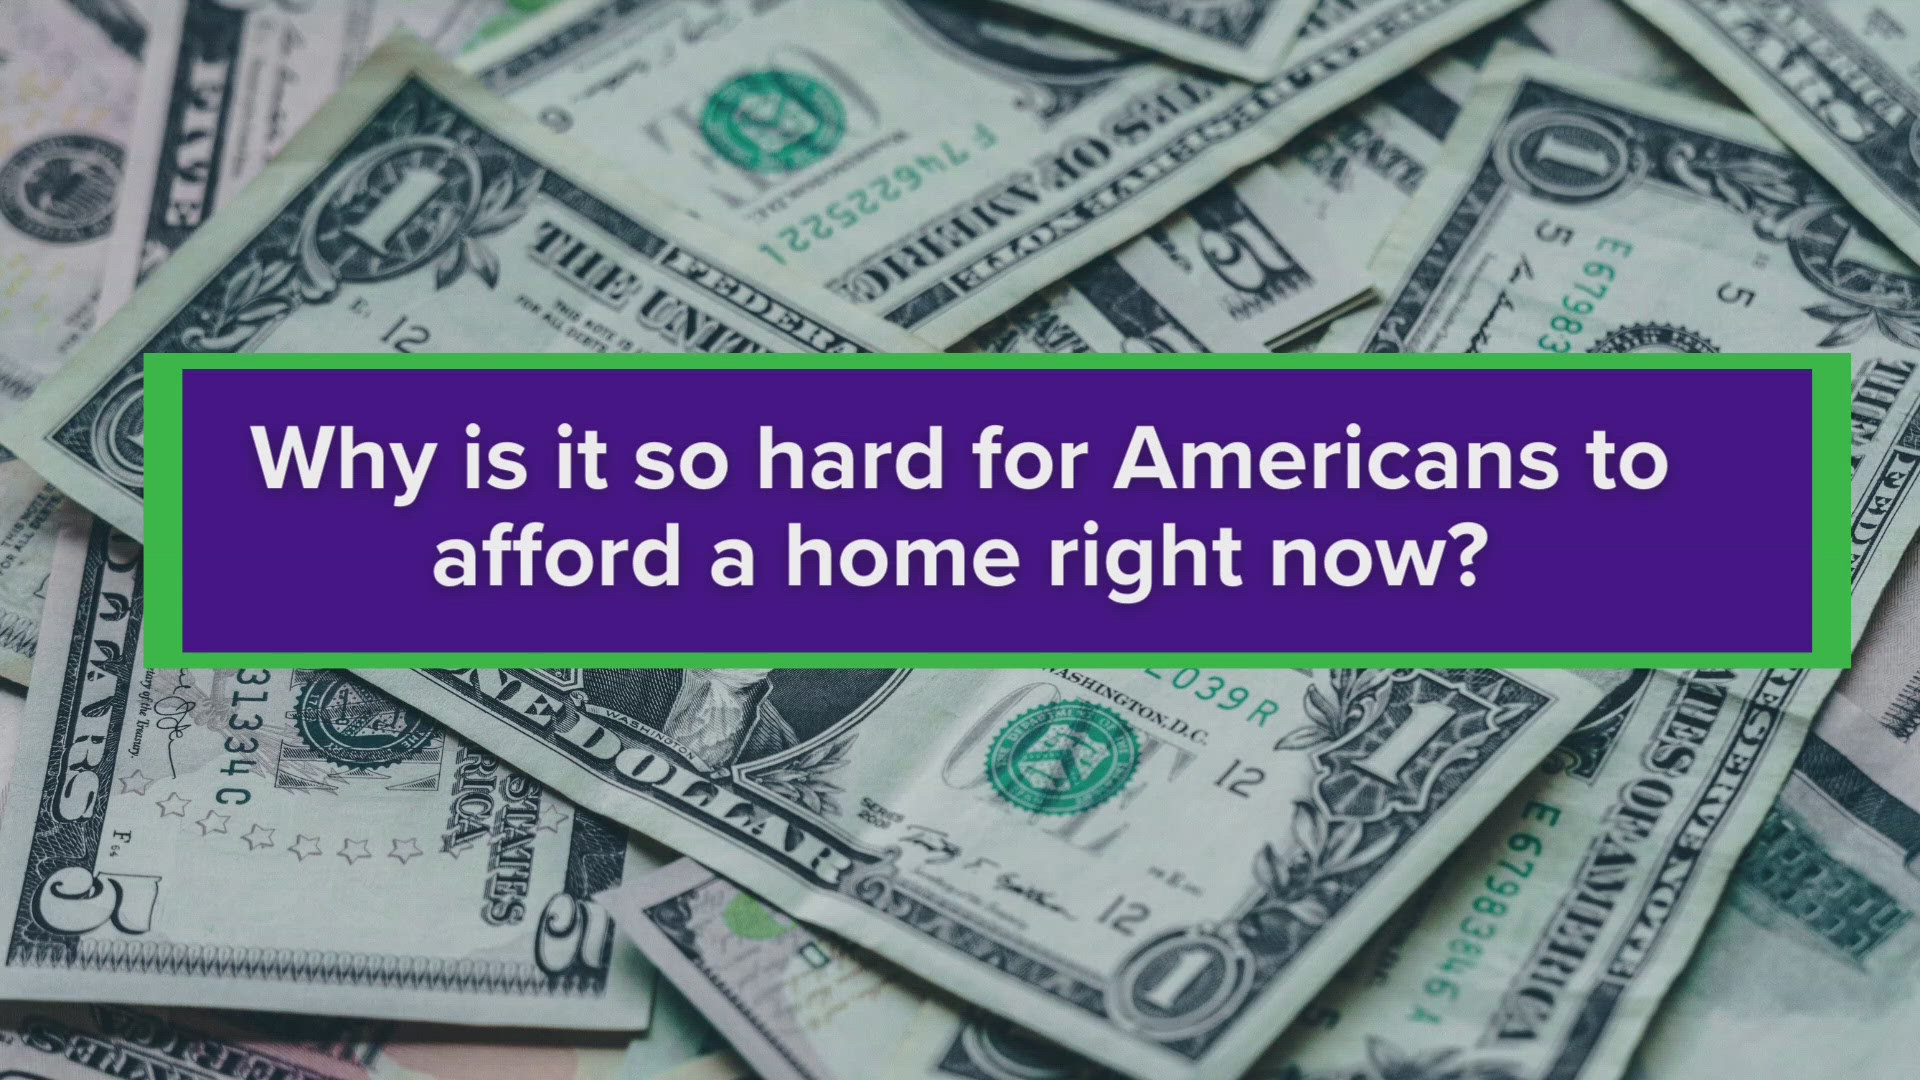 With high interest rates and high prices, many feel frustrated they can't afford the home they want.